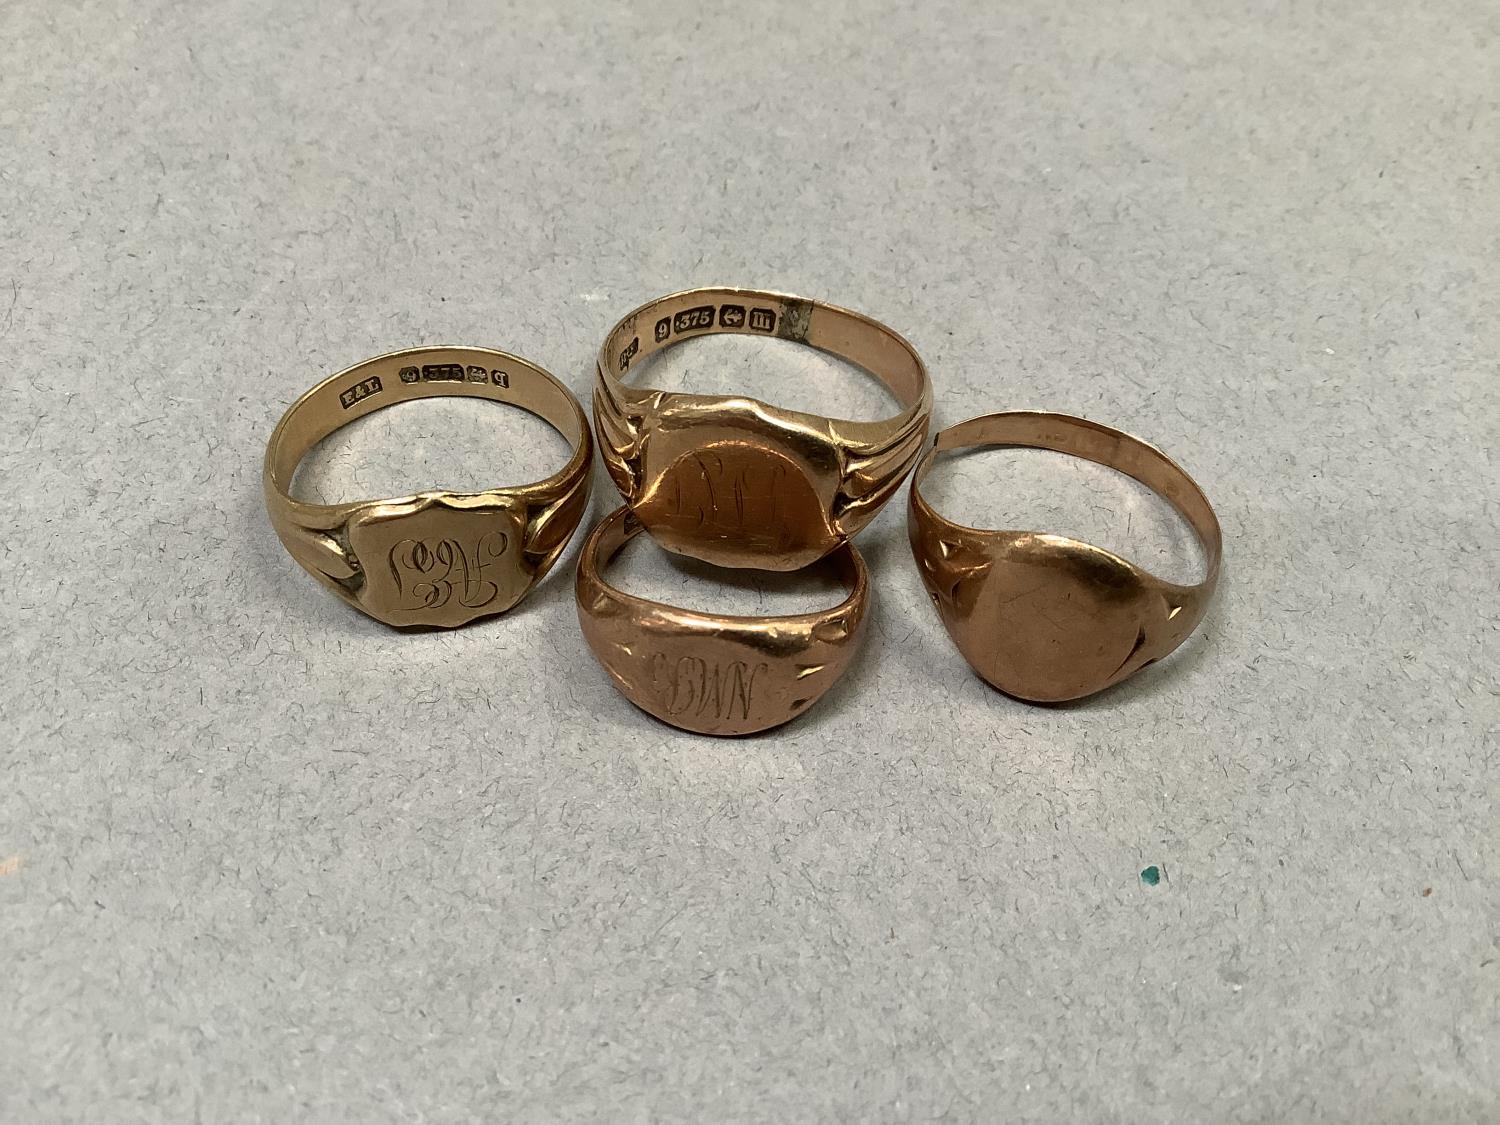 Four early 20th century signet rings in rose gold, total approximate weight 16g - Image 2 of 2